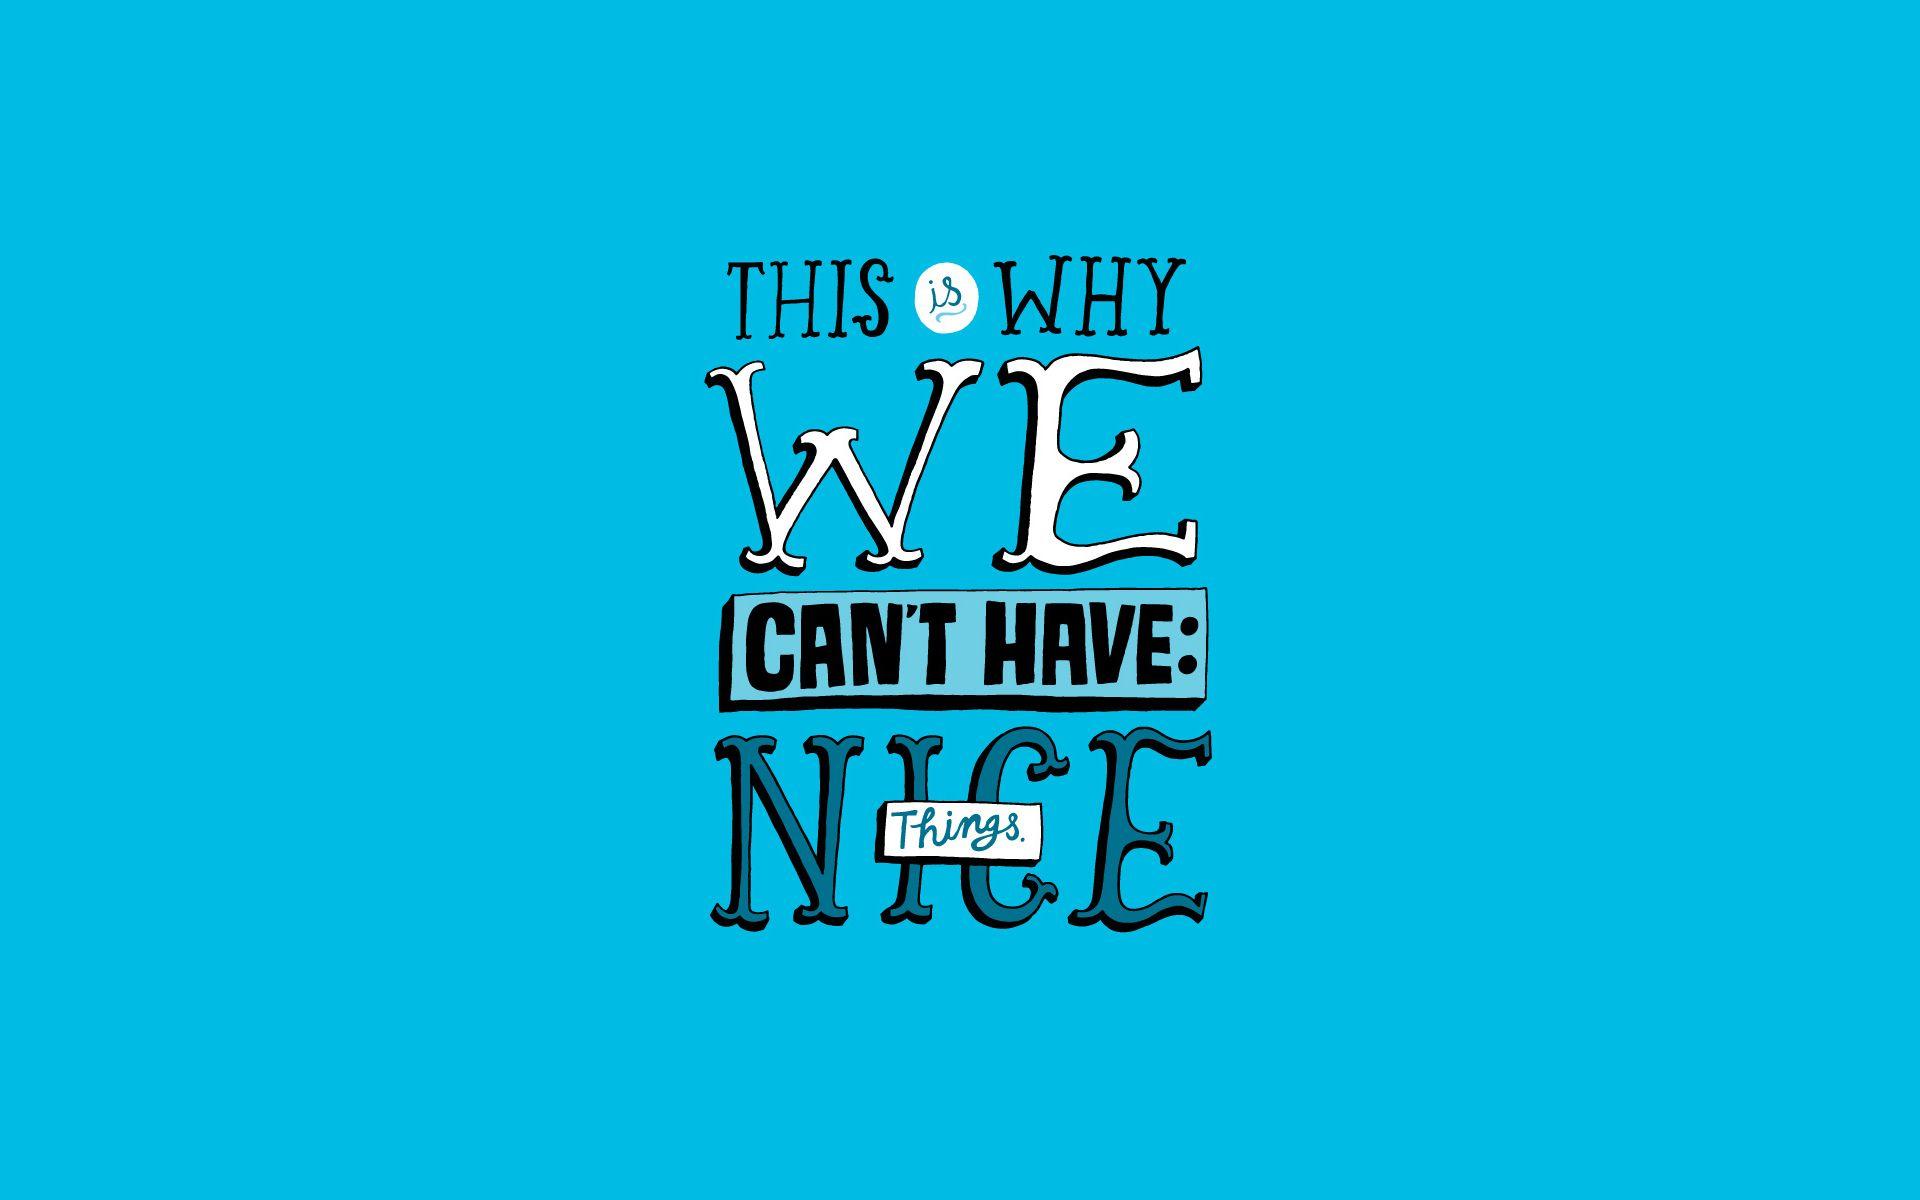 Nice Things Blue Humor Text Quotes Statement Wallpaper At Texts